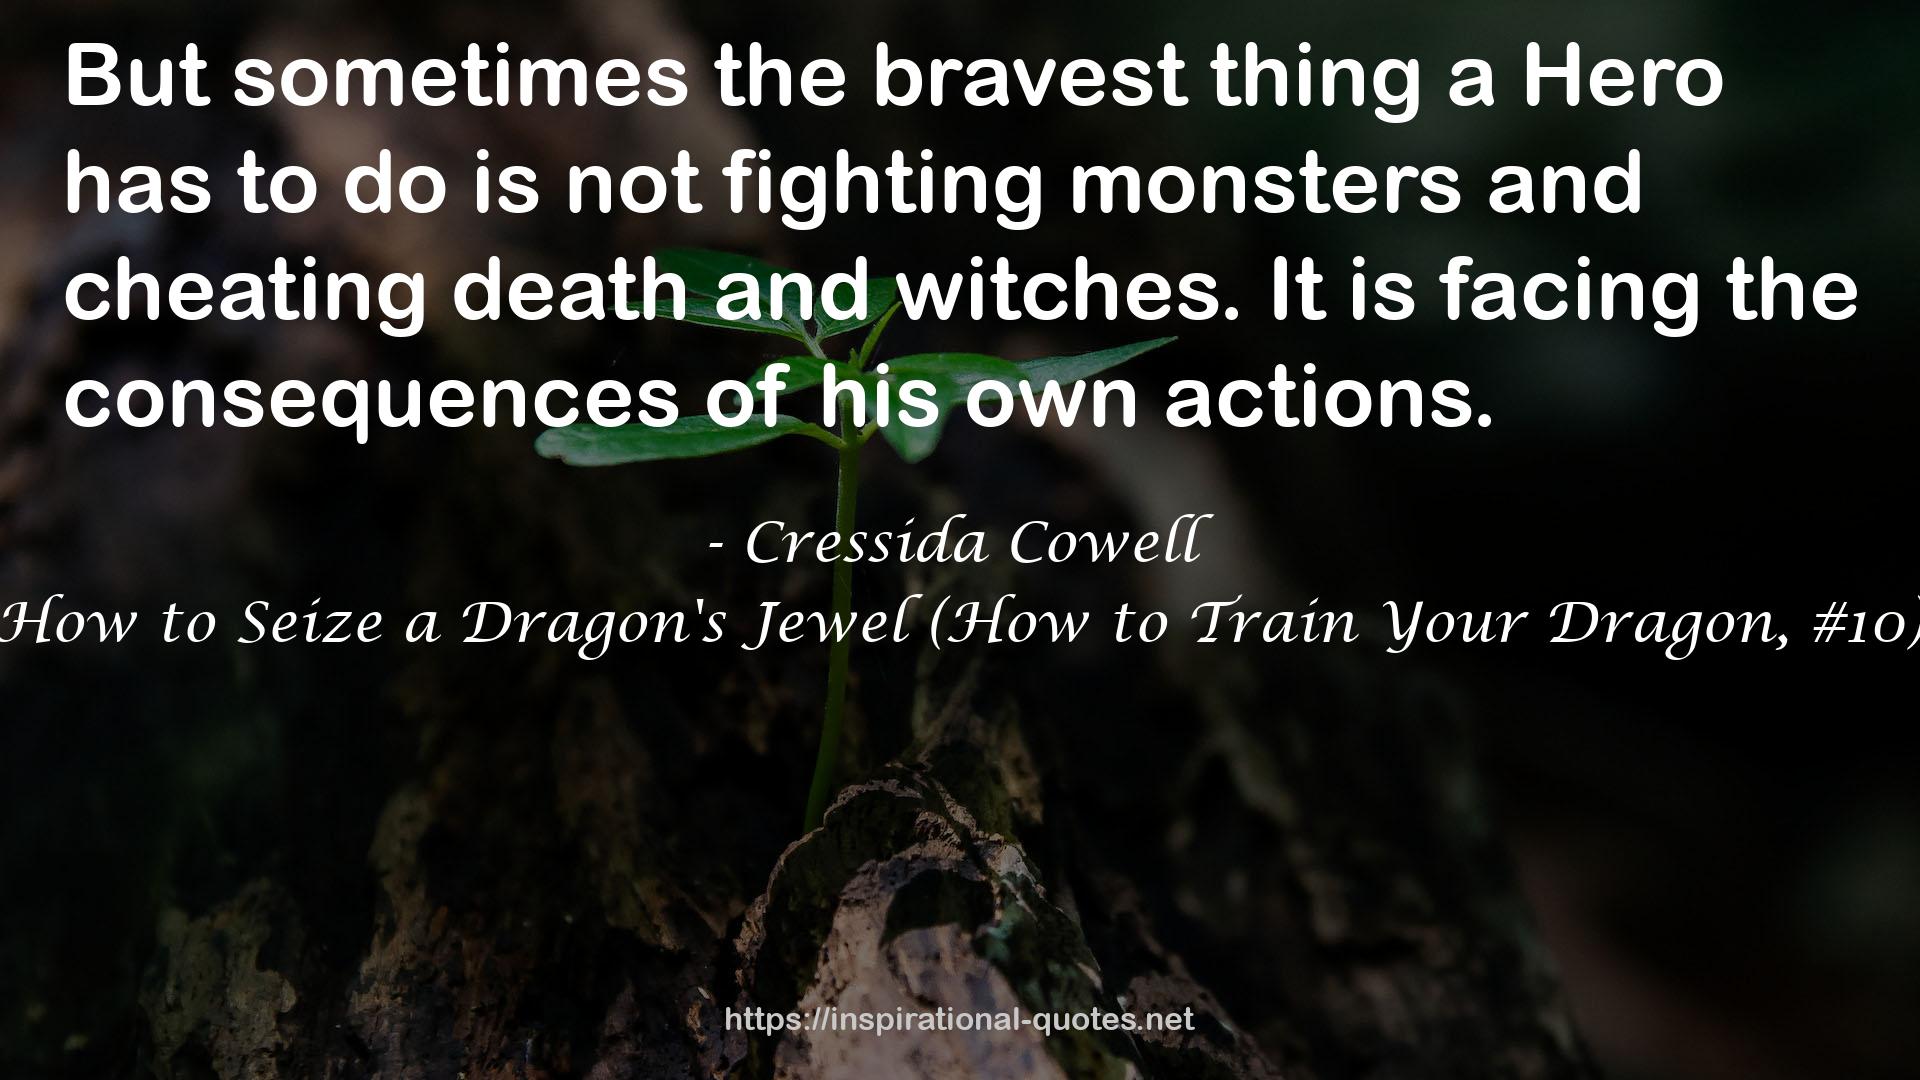 How to Seize a Dragon's Jewel (How to Train Your Dragon, #10) QUOTES